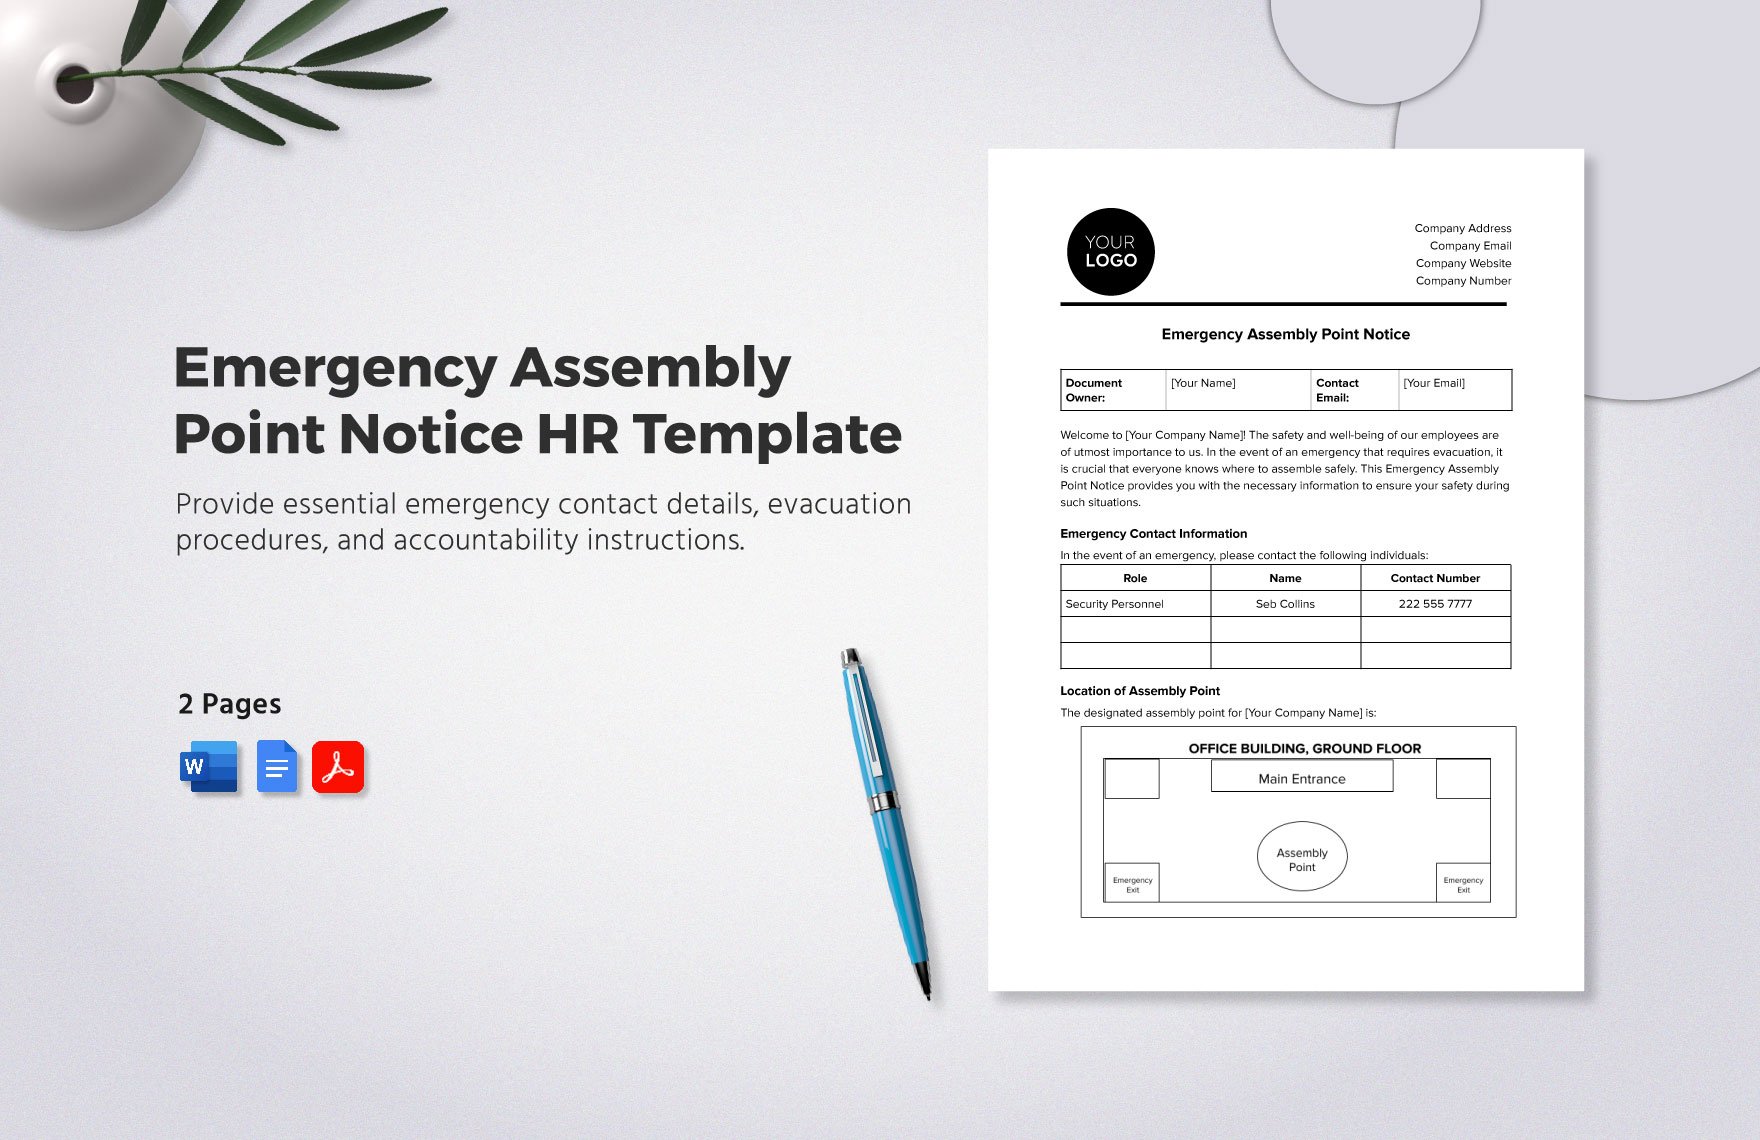 Emergency Assembly Point Notice HR Template in Word, Google Docs, PDF